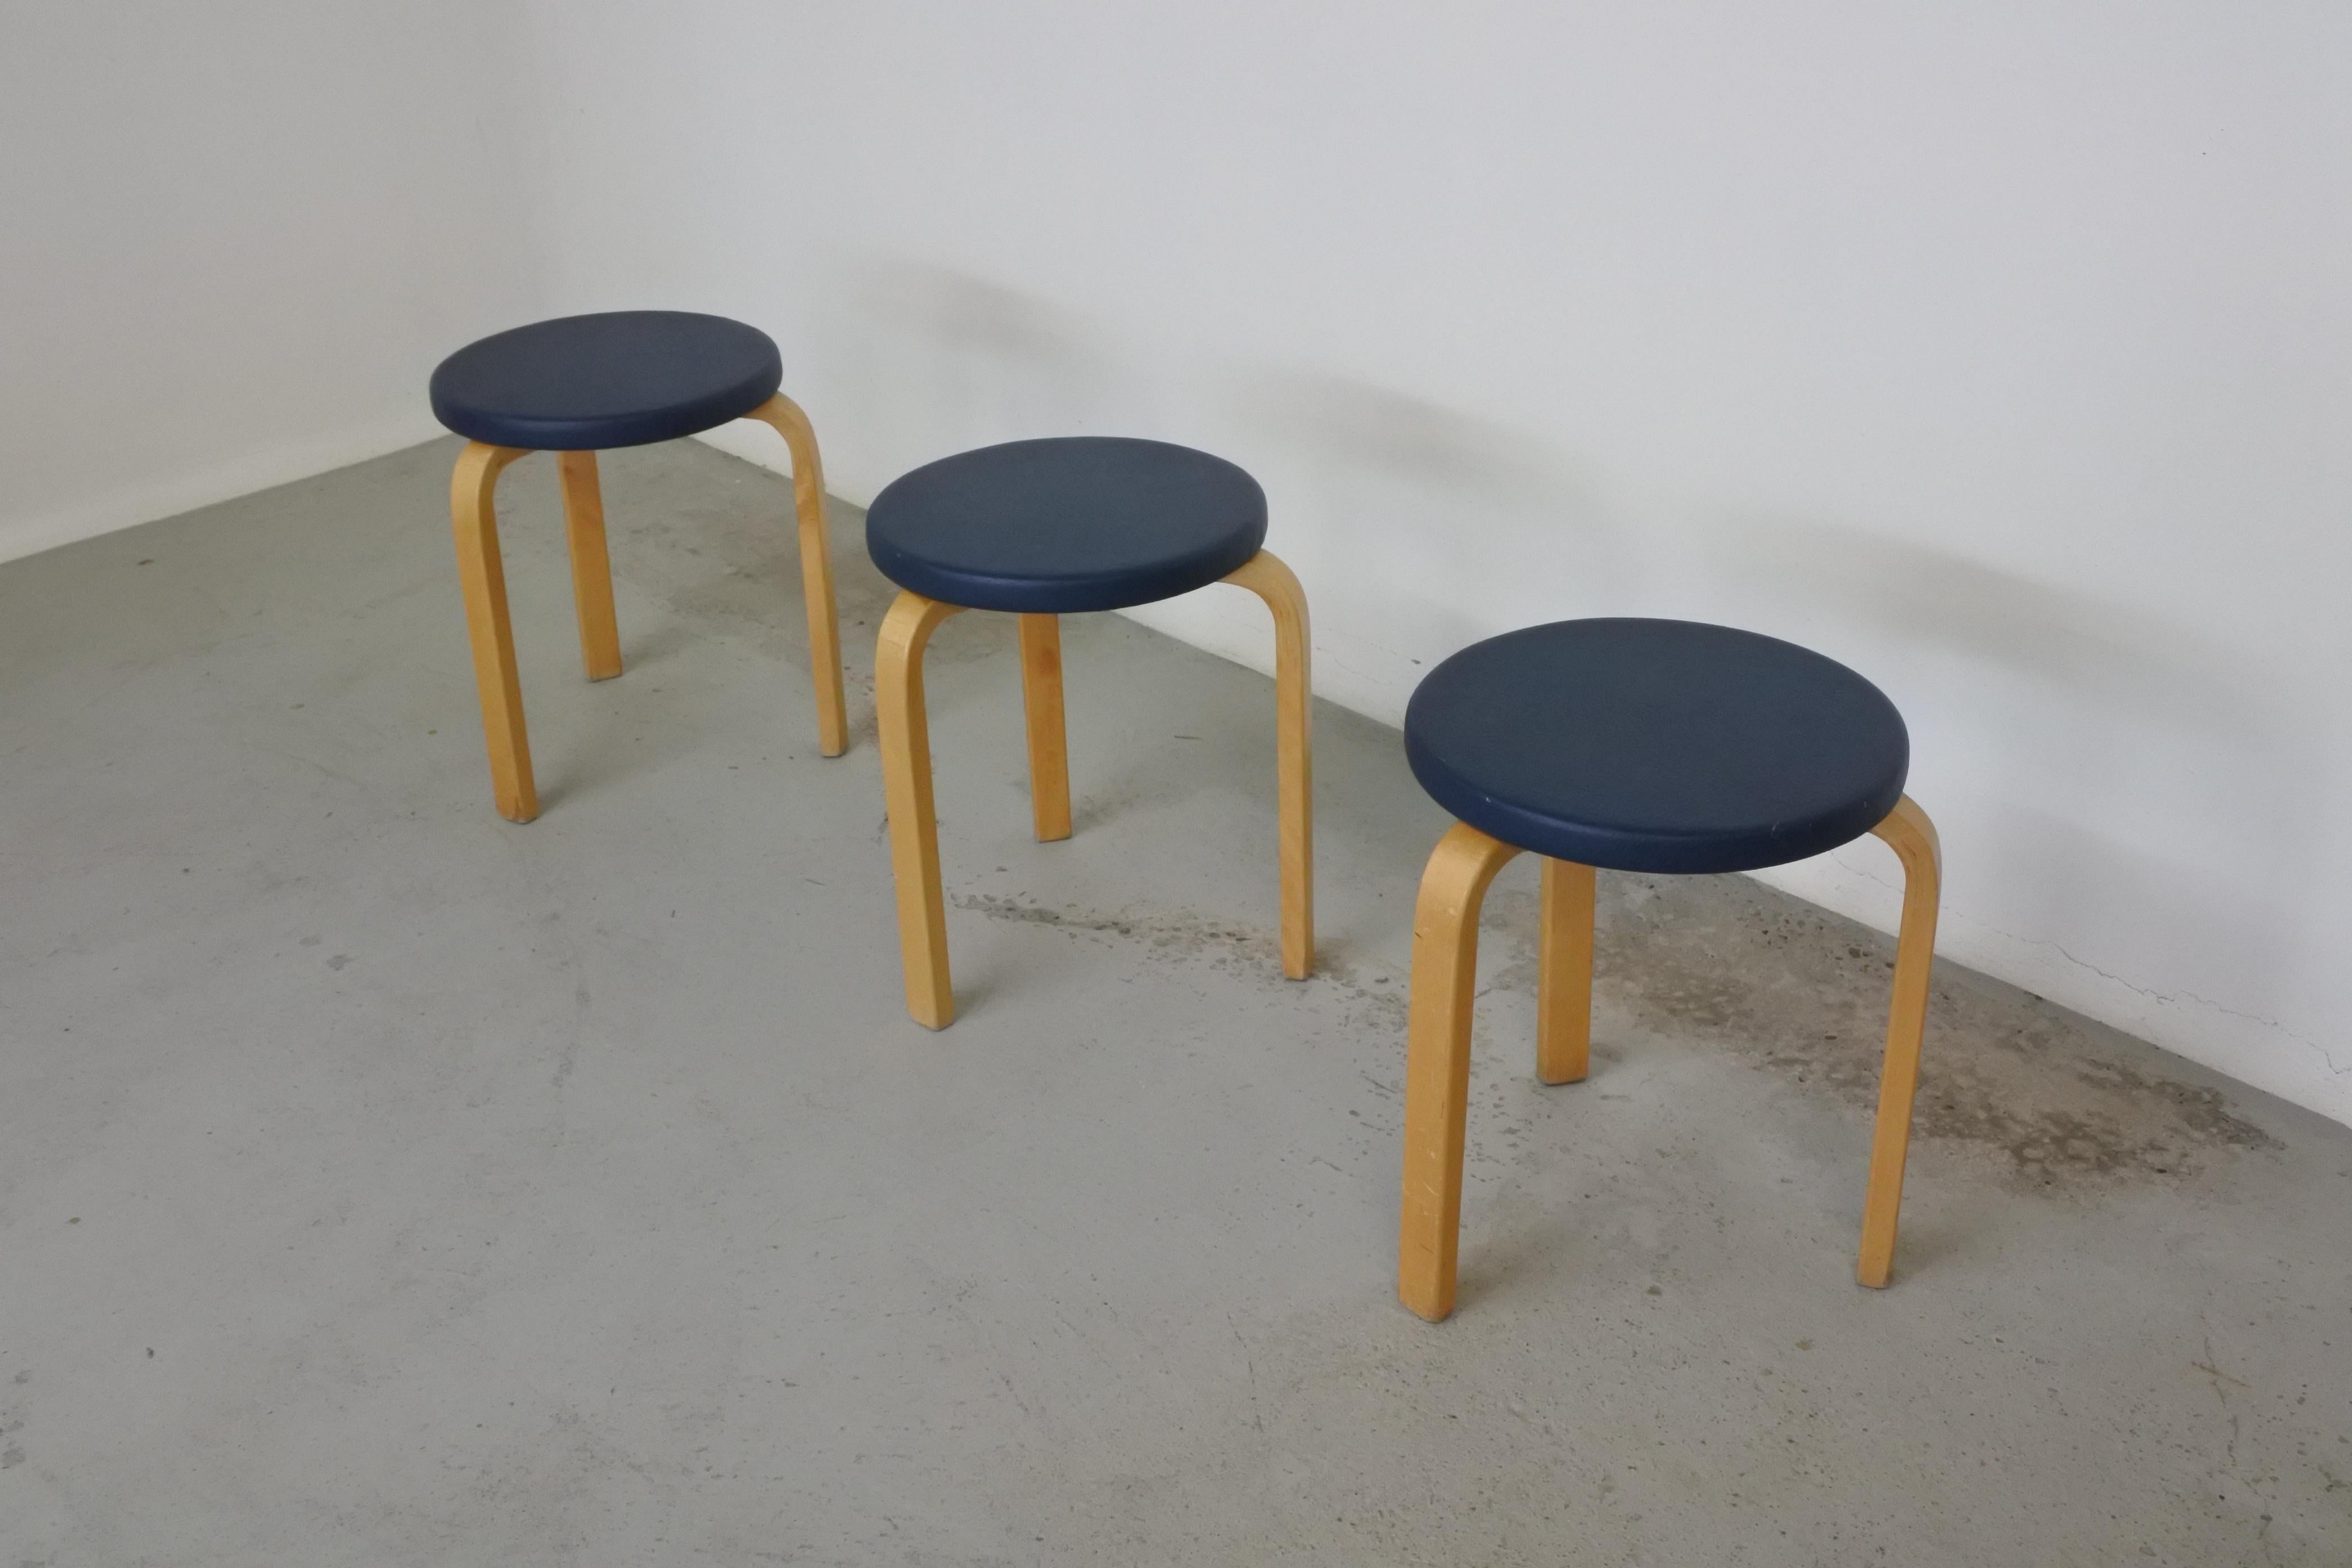 Set of 3 early tripod stools by Alvar Aalto.
Model 60.
Wood and upholstered seat in blue faux leather.
Made in Finland circa 1950.

Each stool bears the coat of arms of the city of Helsinki.

Good original condition, the faux leather shows